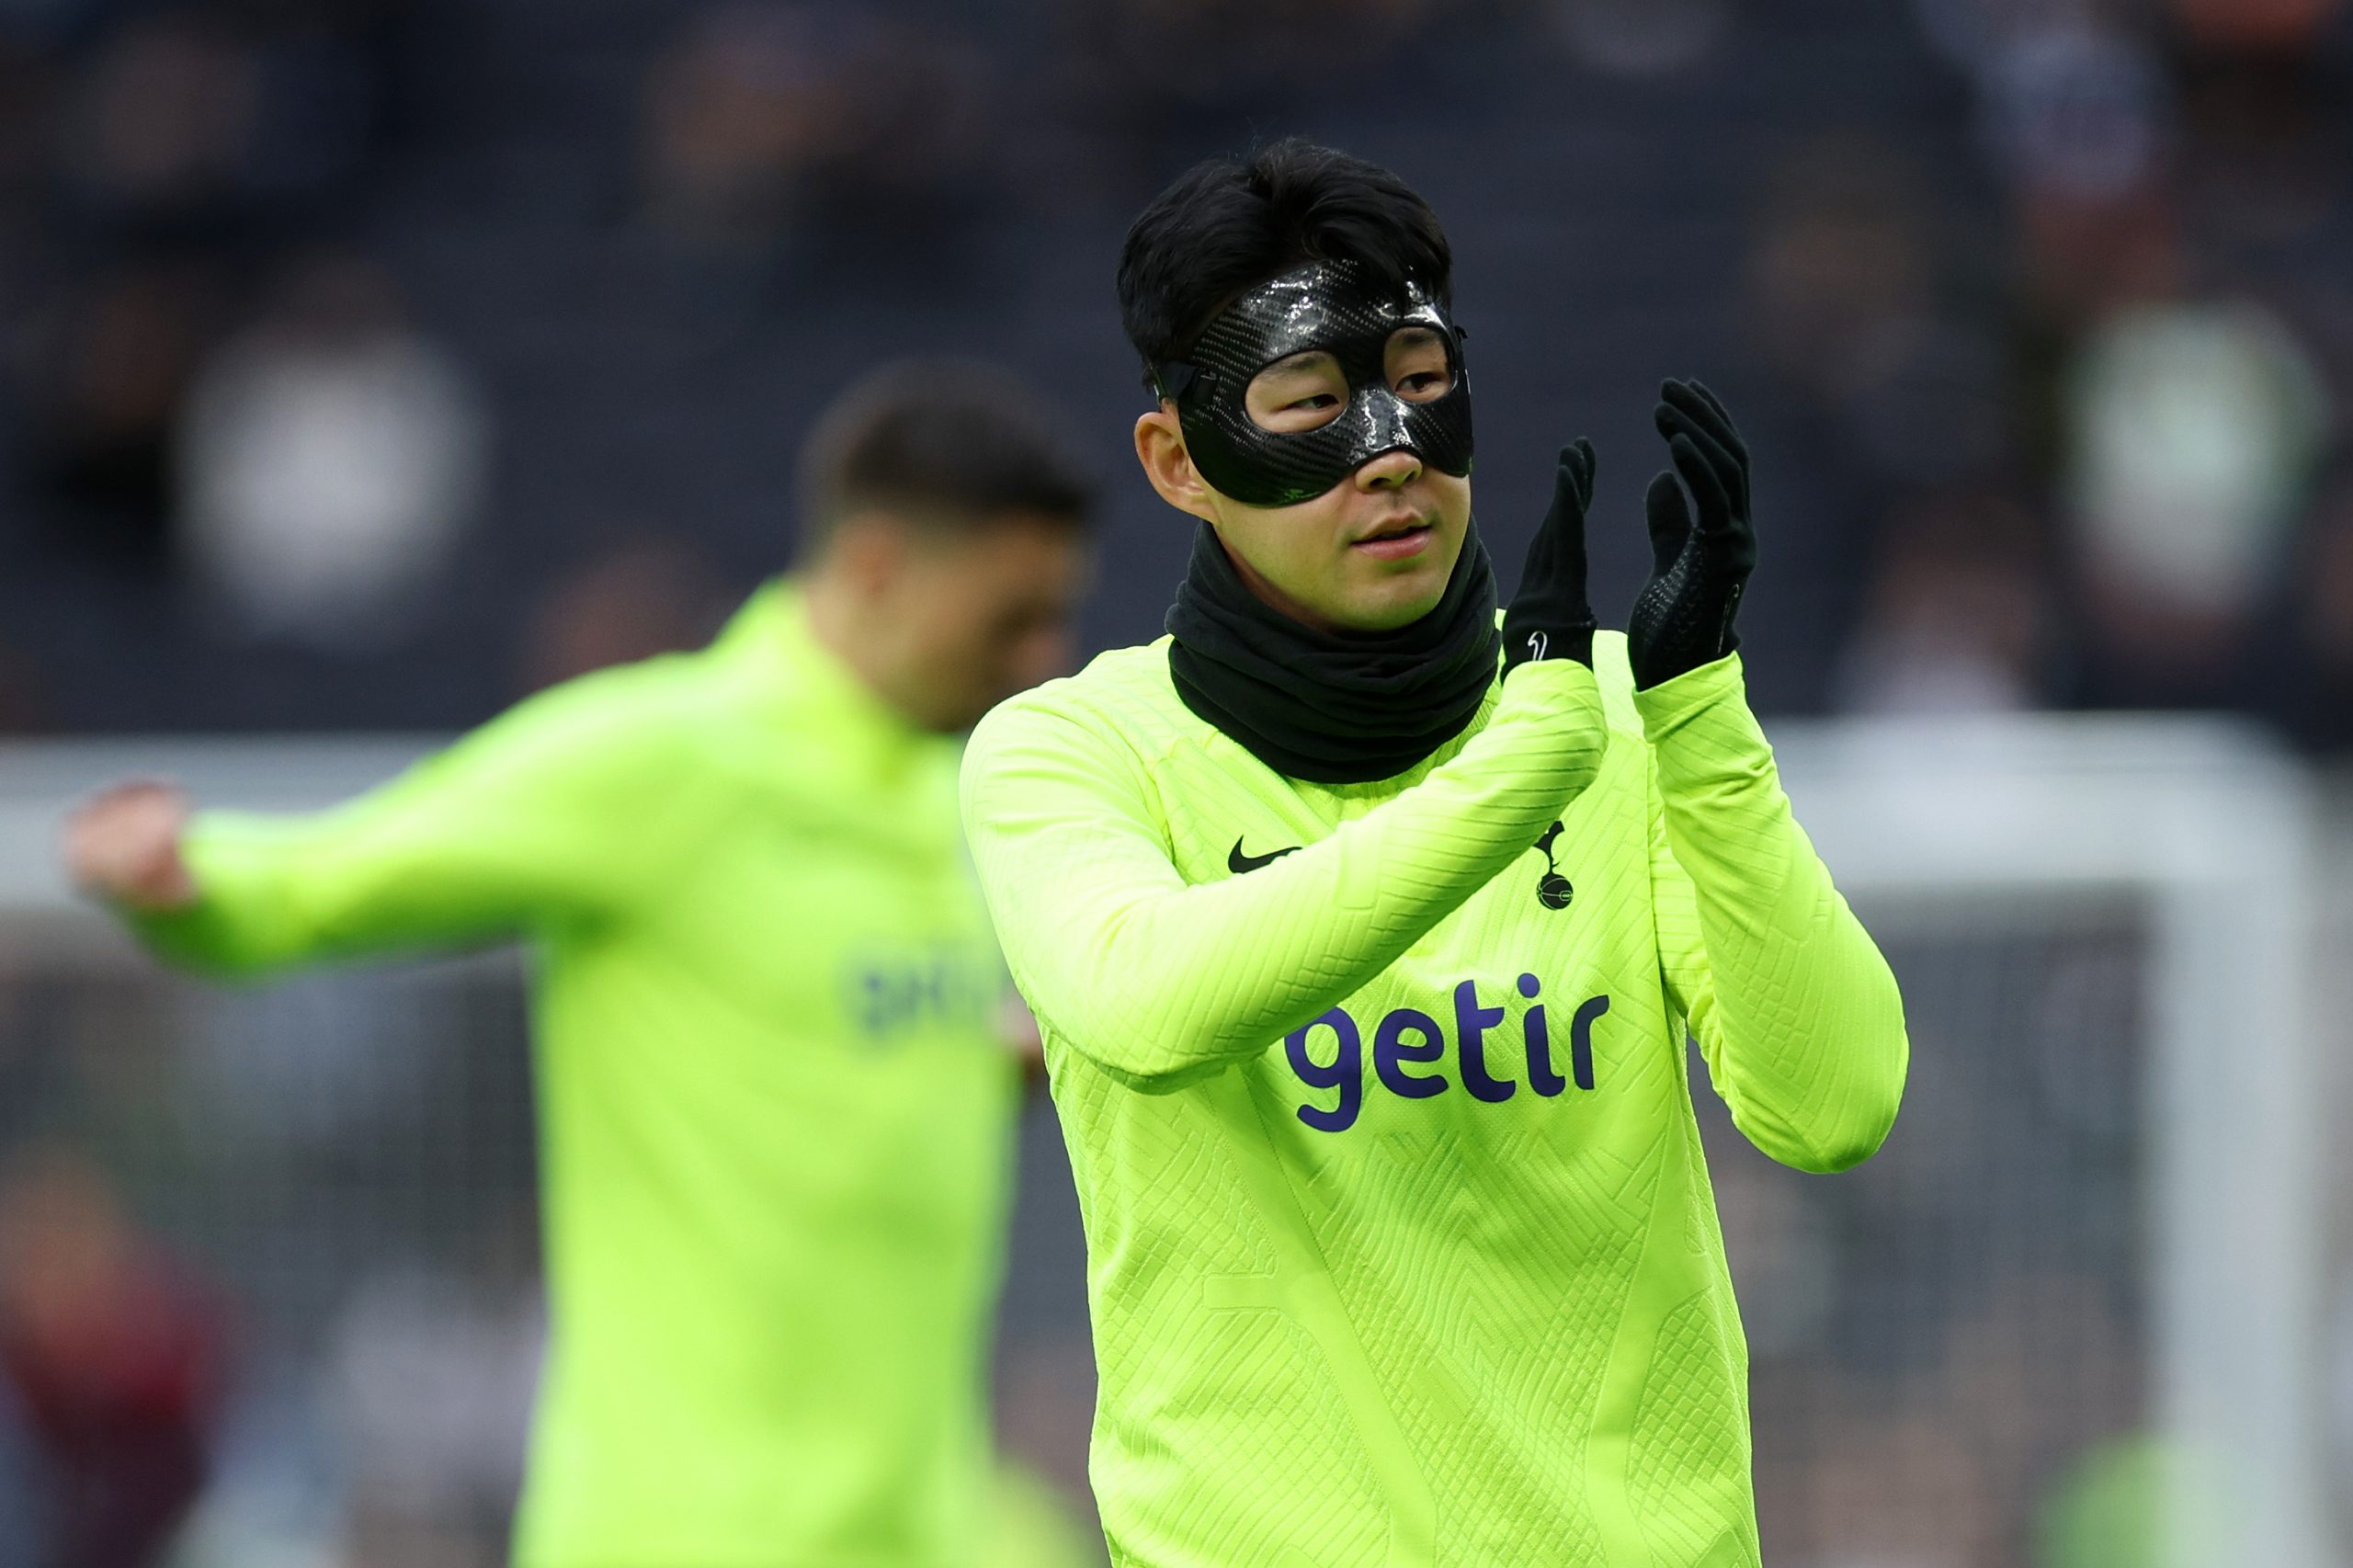 Tottenham Hotspur star Son Heung-Min is very sad after the defeat to Leicester City.